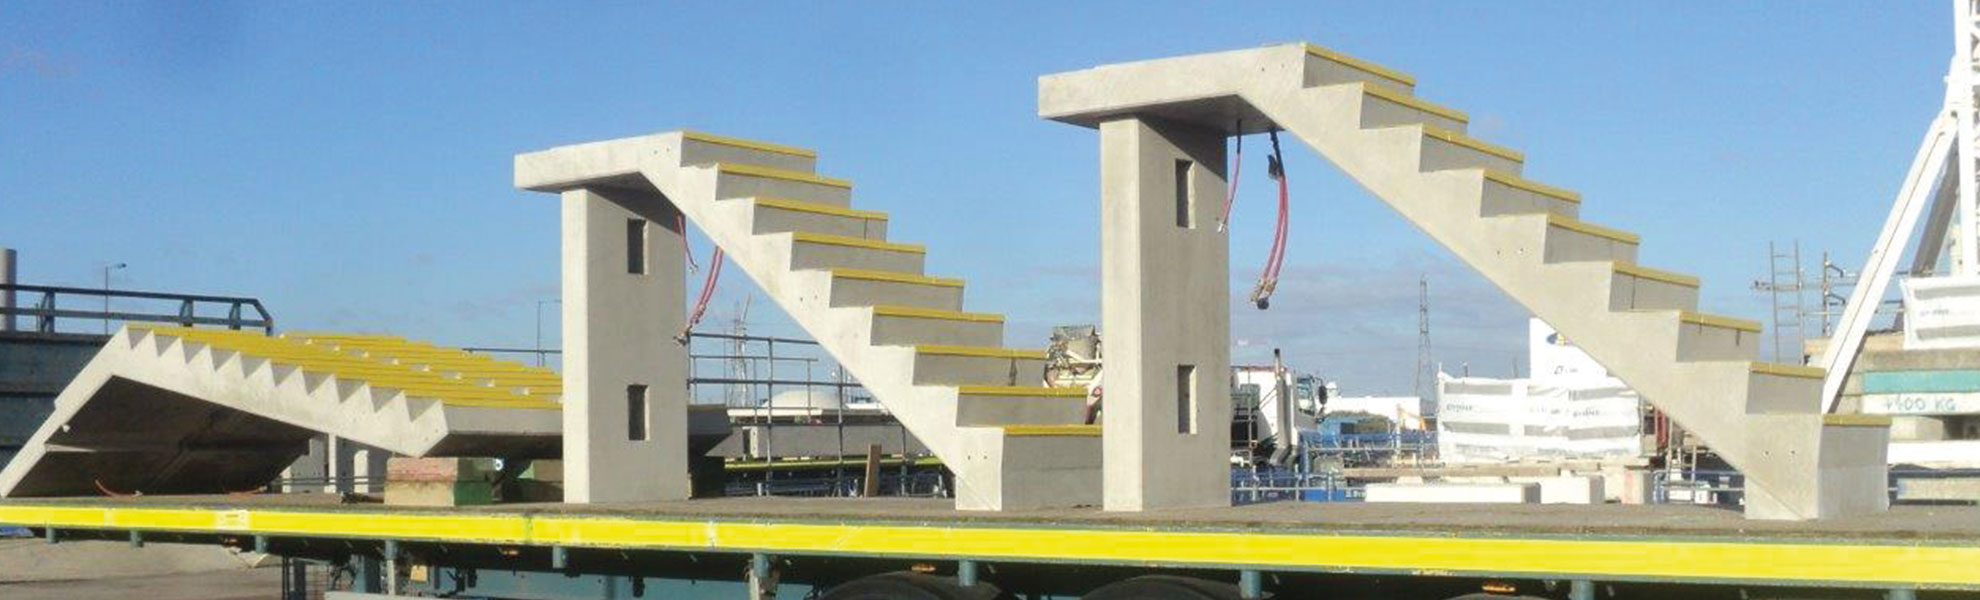 Matravers Engineering Concrete Stairs precast concrete and steel moulds